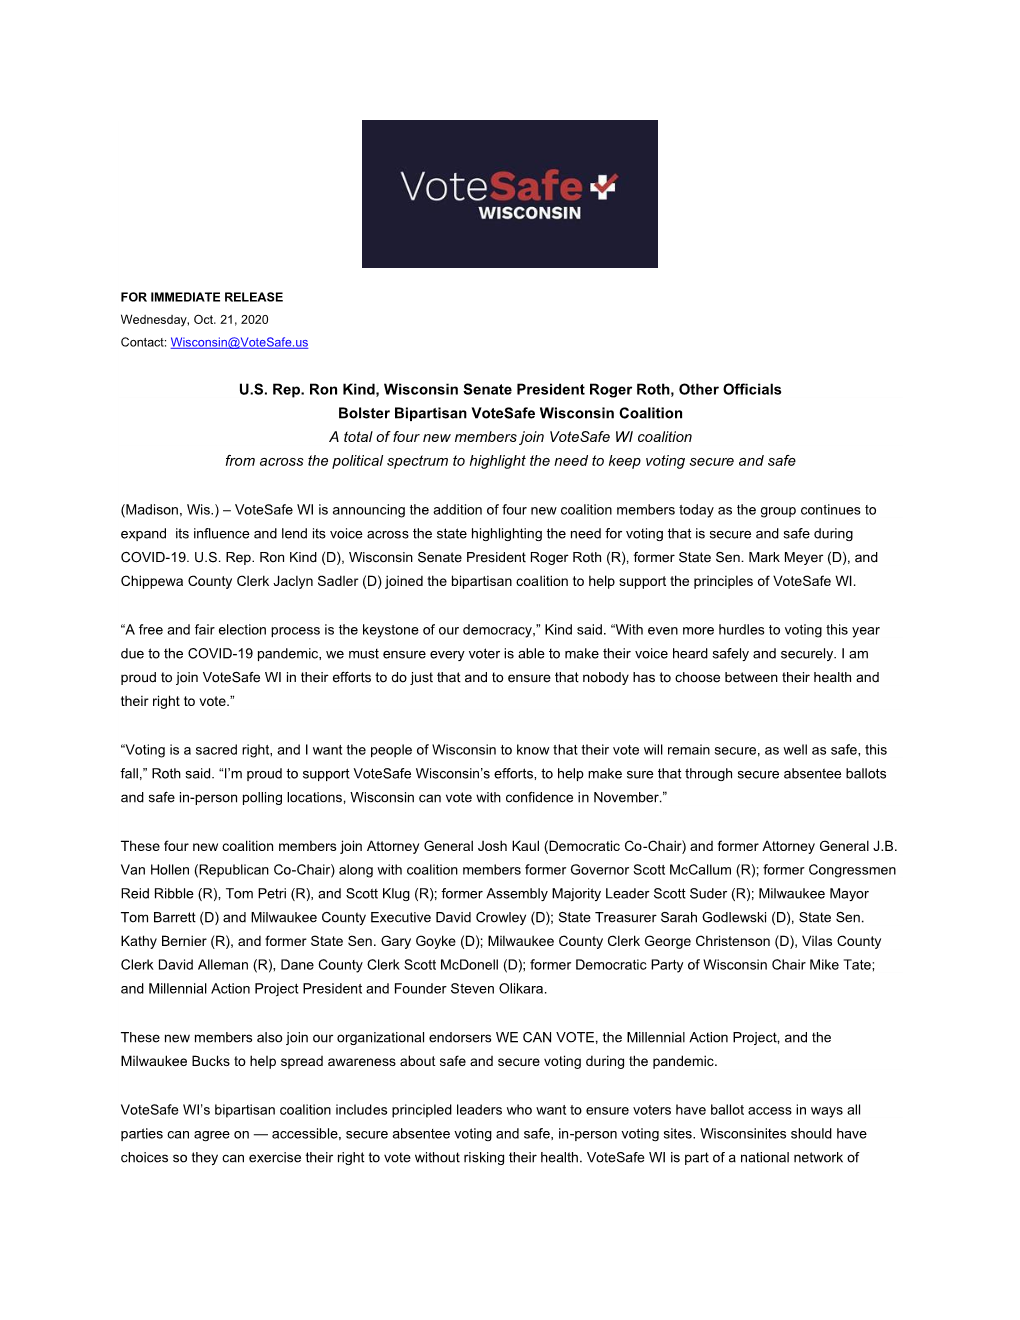 U.S. Rep. Ron Kind, Wisconsin Senate President Roger Roth, Other Officials Bolster Bipartisan Votesafe Wisconsin Coalition A